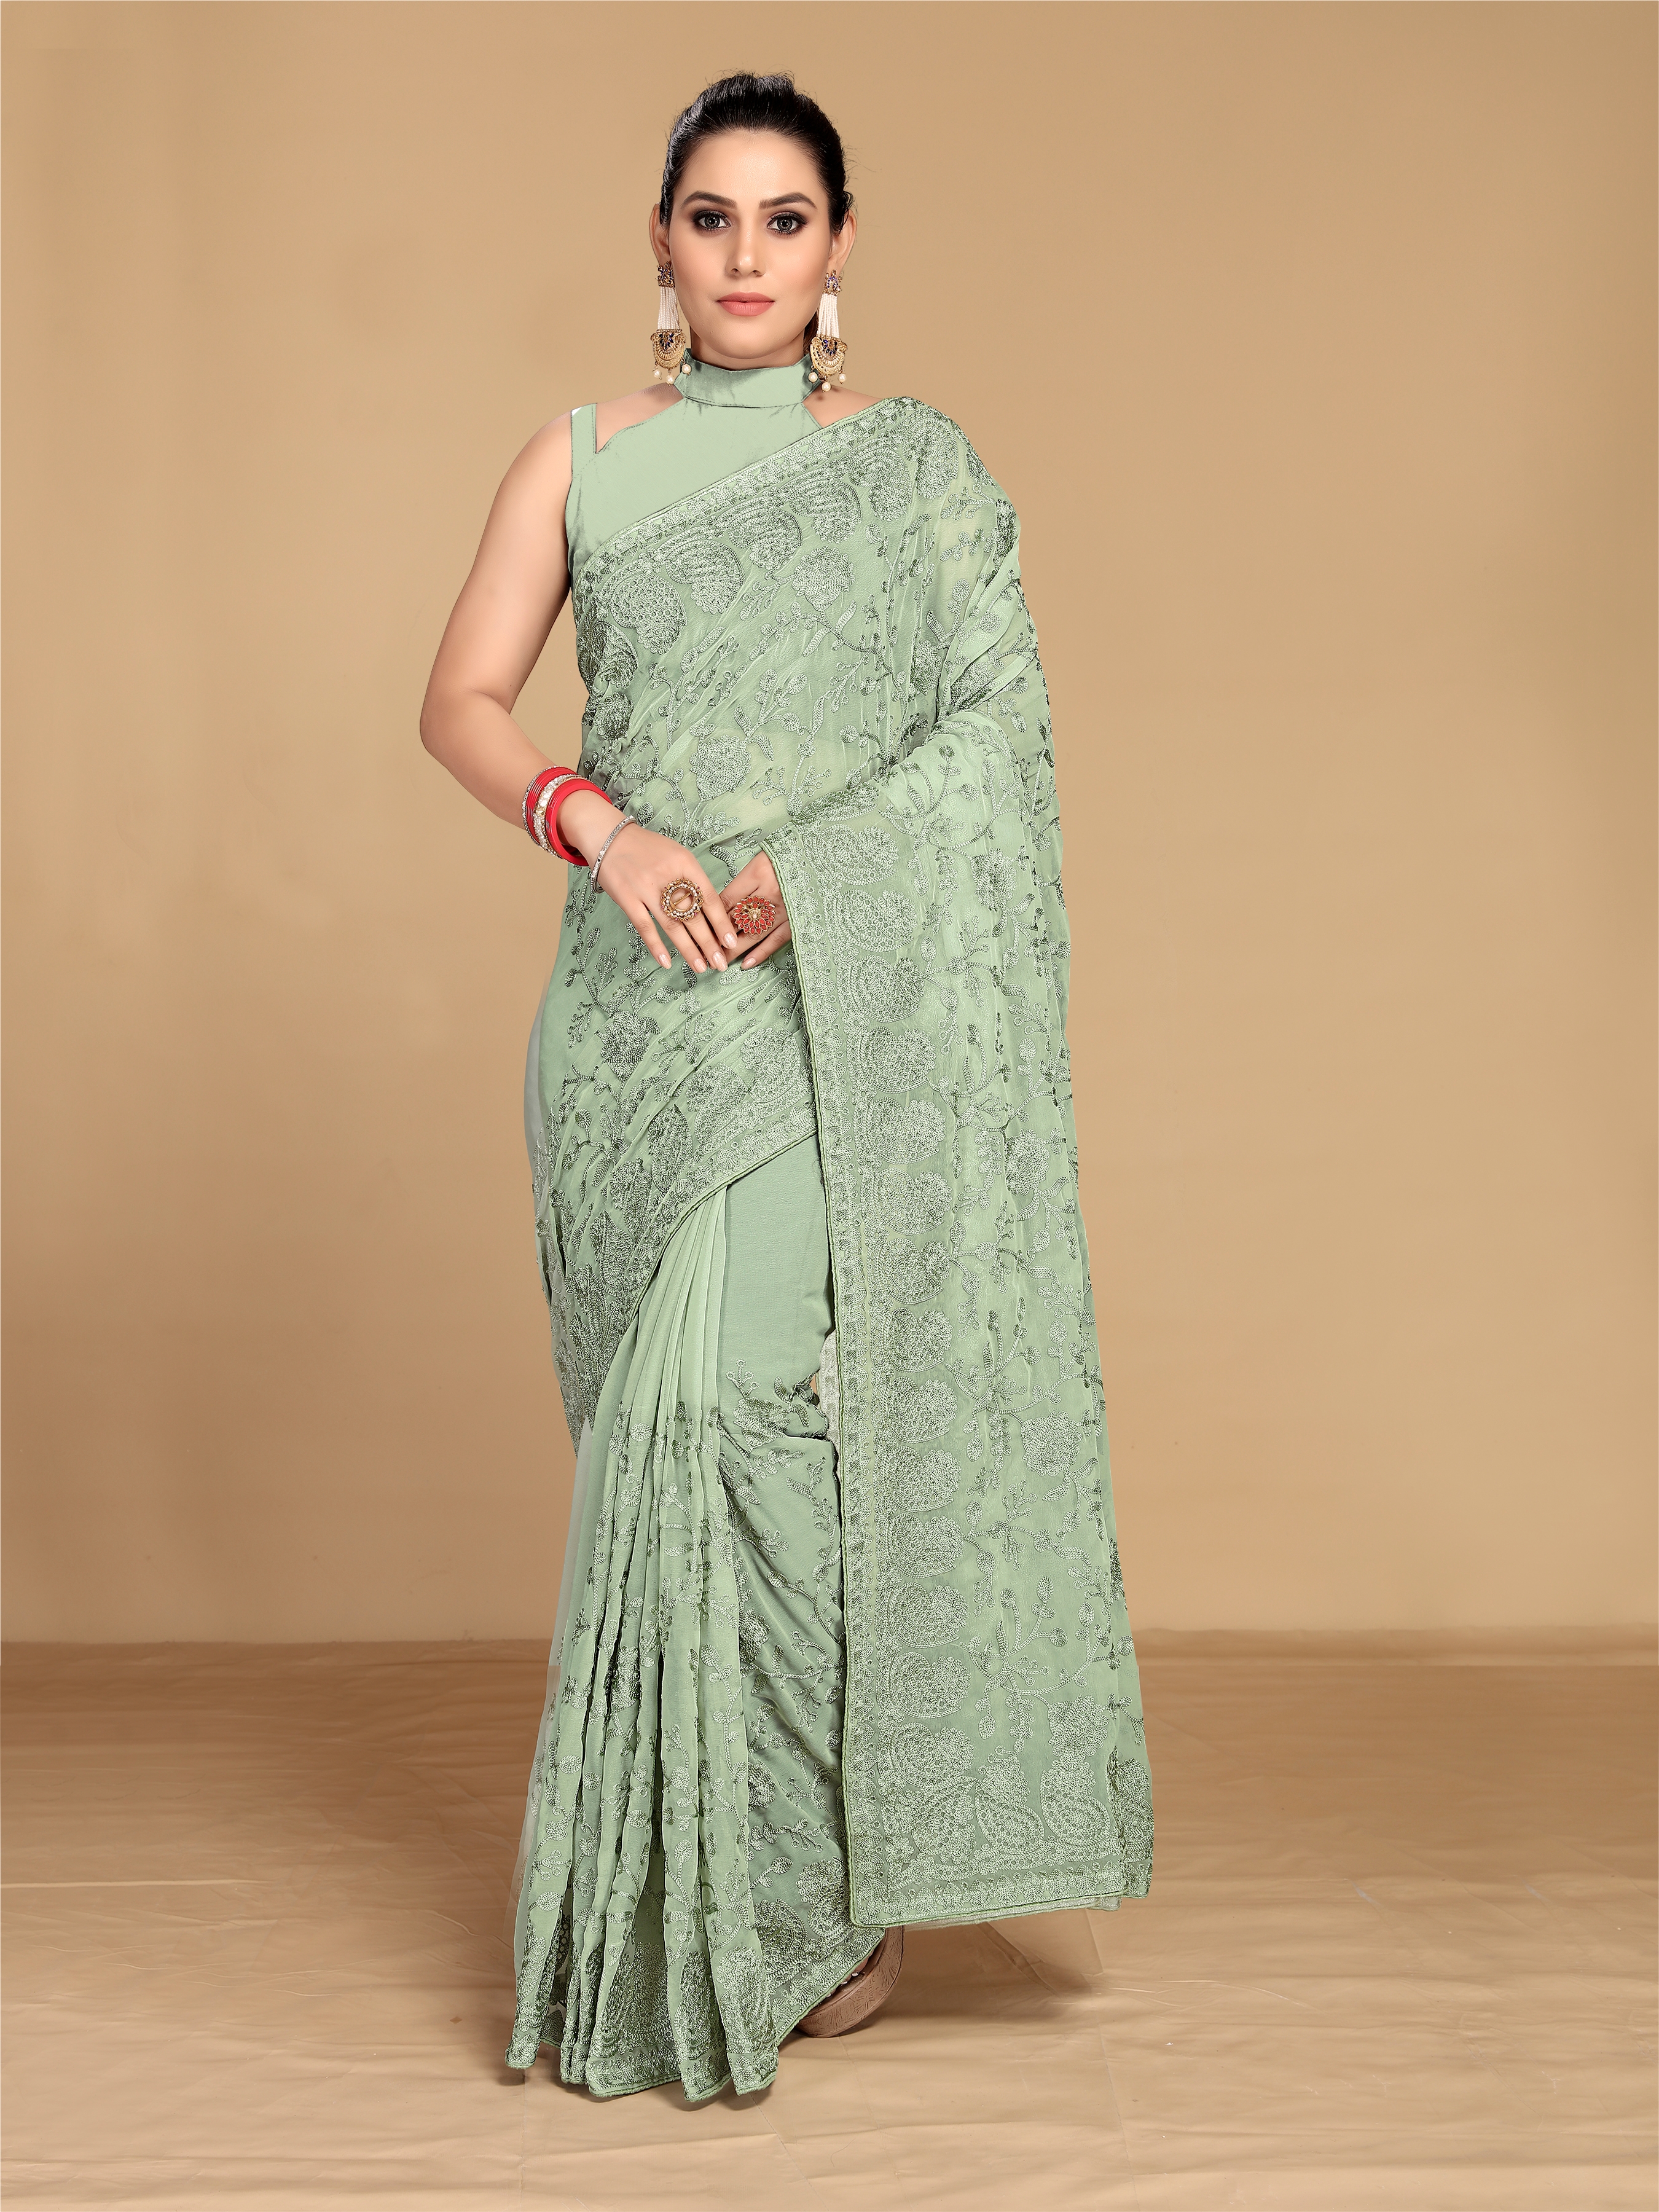 Embroidered Georgette Party Wear Saree in Green with Blouse